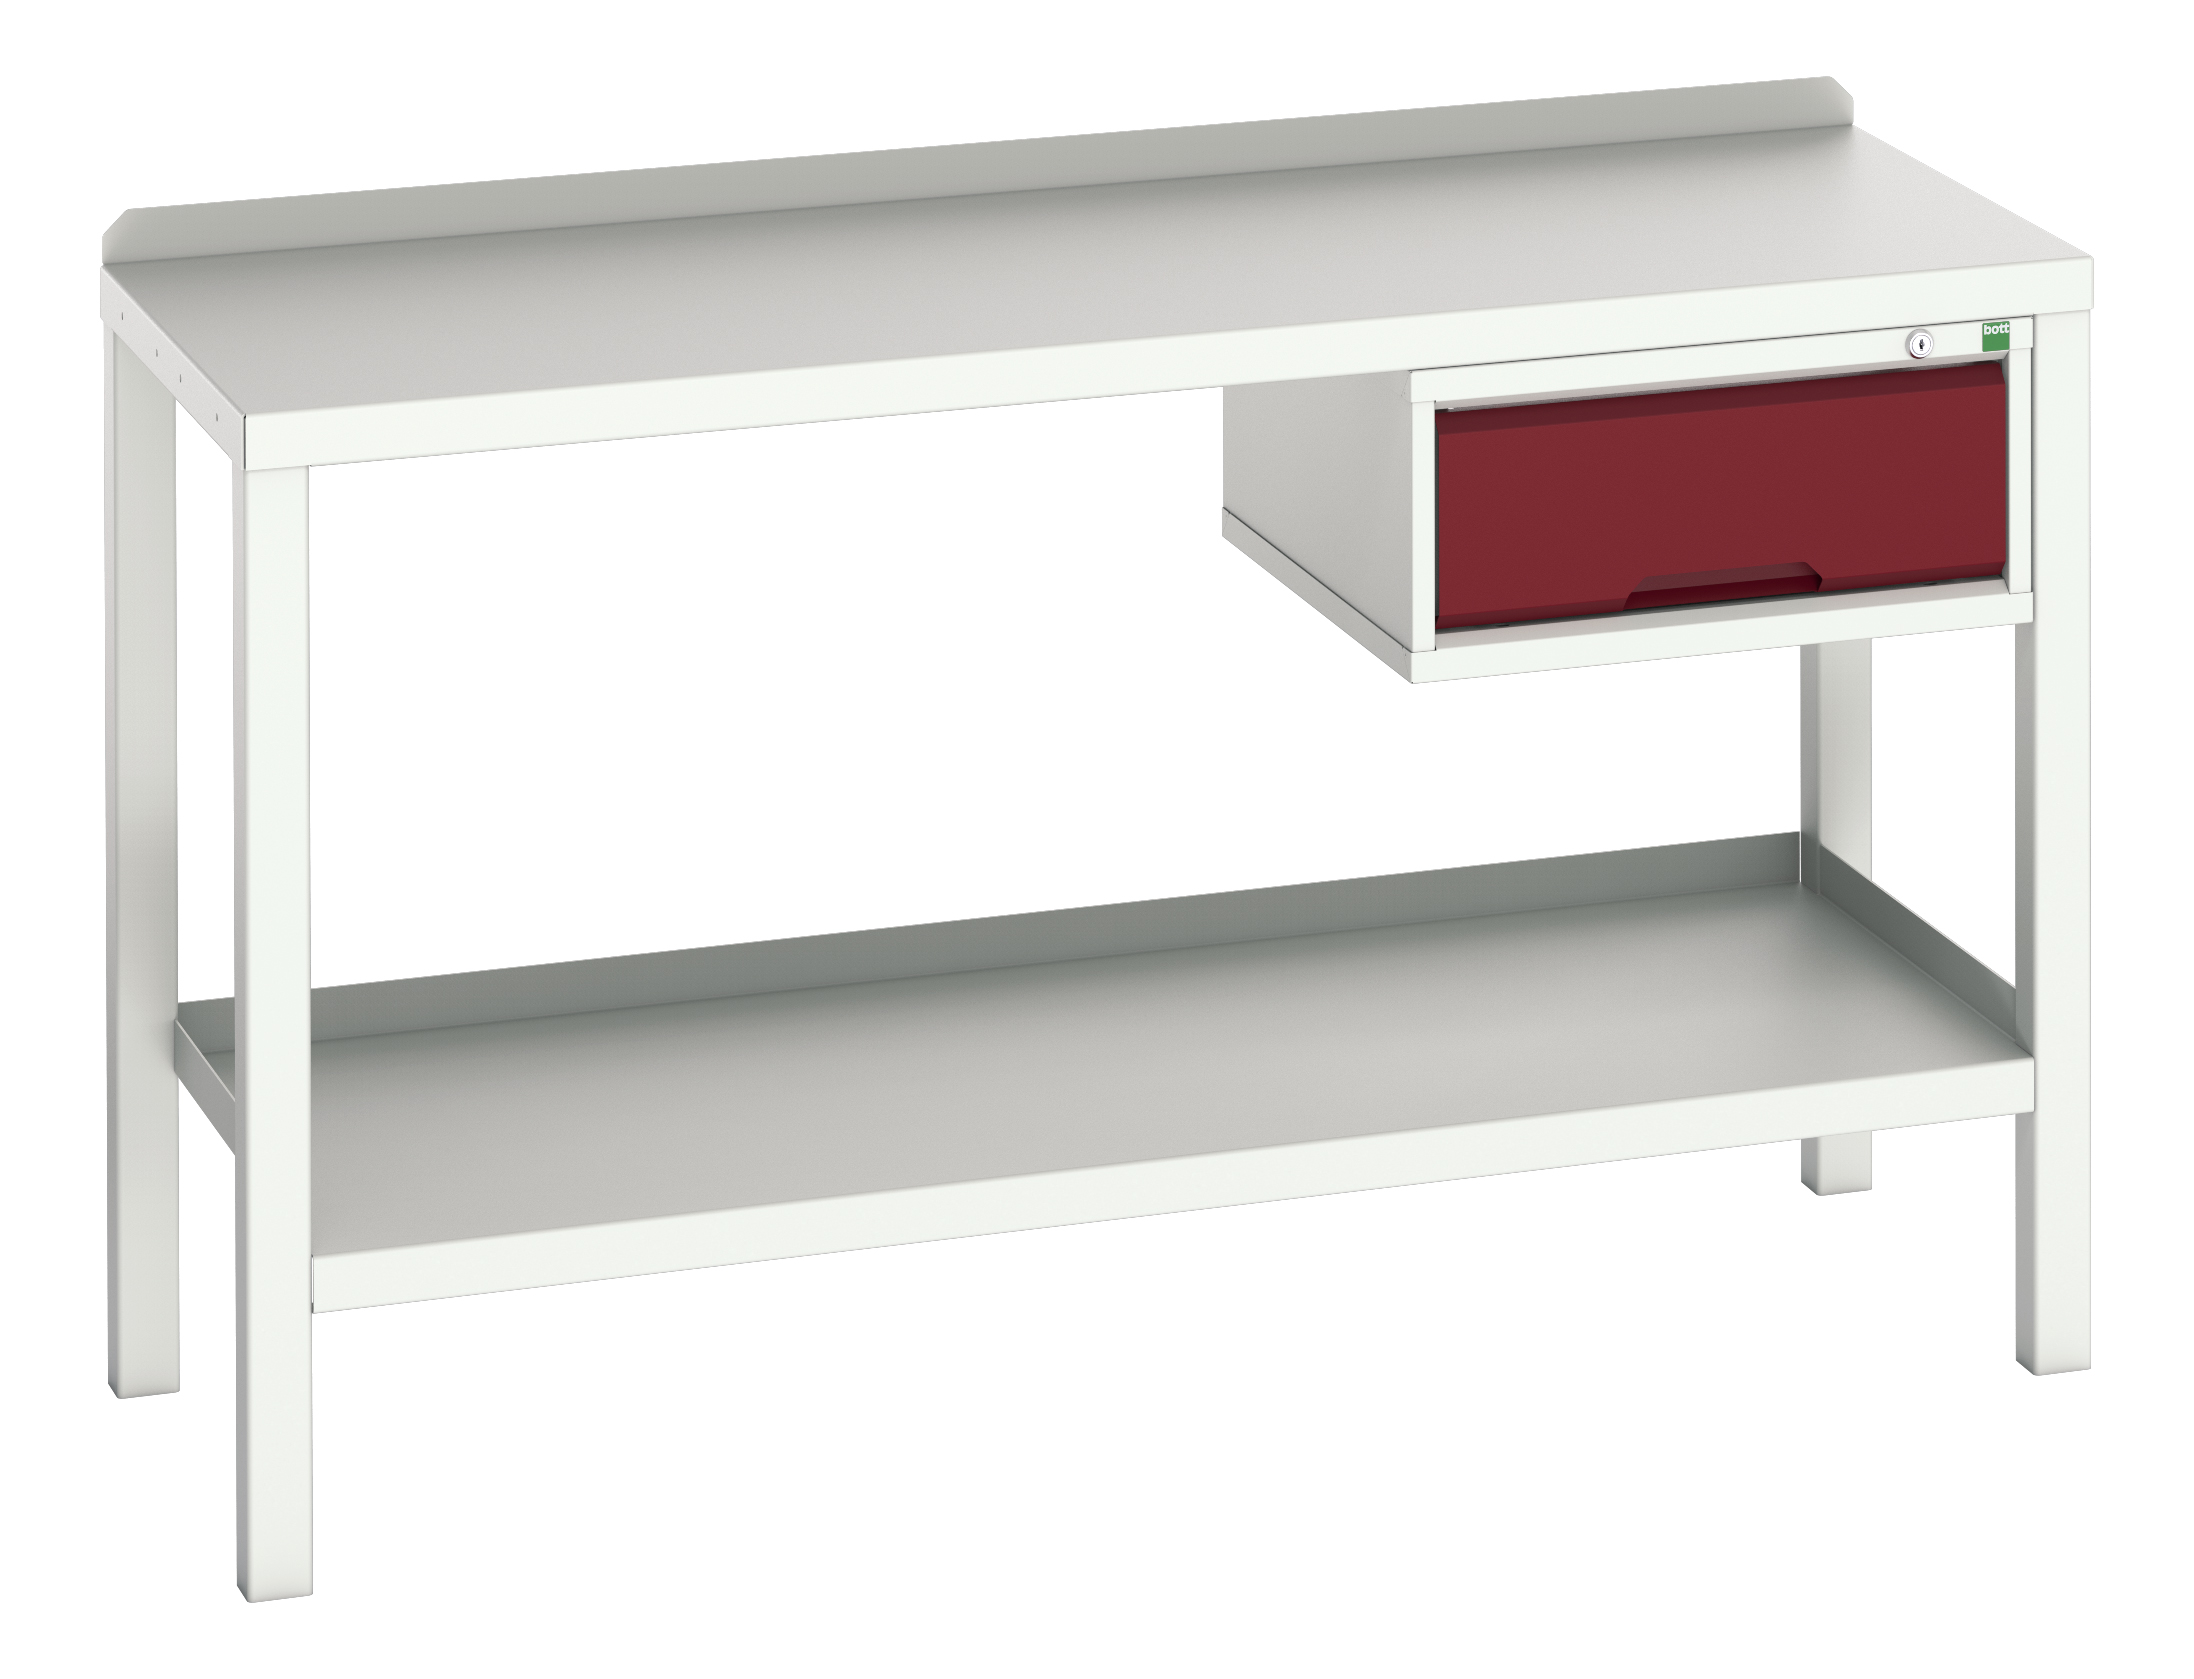 Bott Verso Welded Bench With 1 Drawer Cabinet - 16922604.24